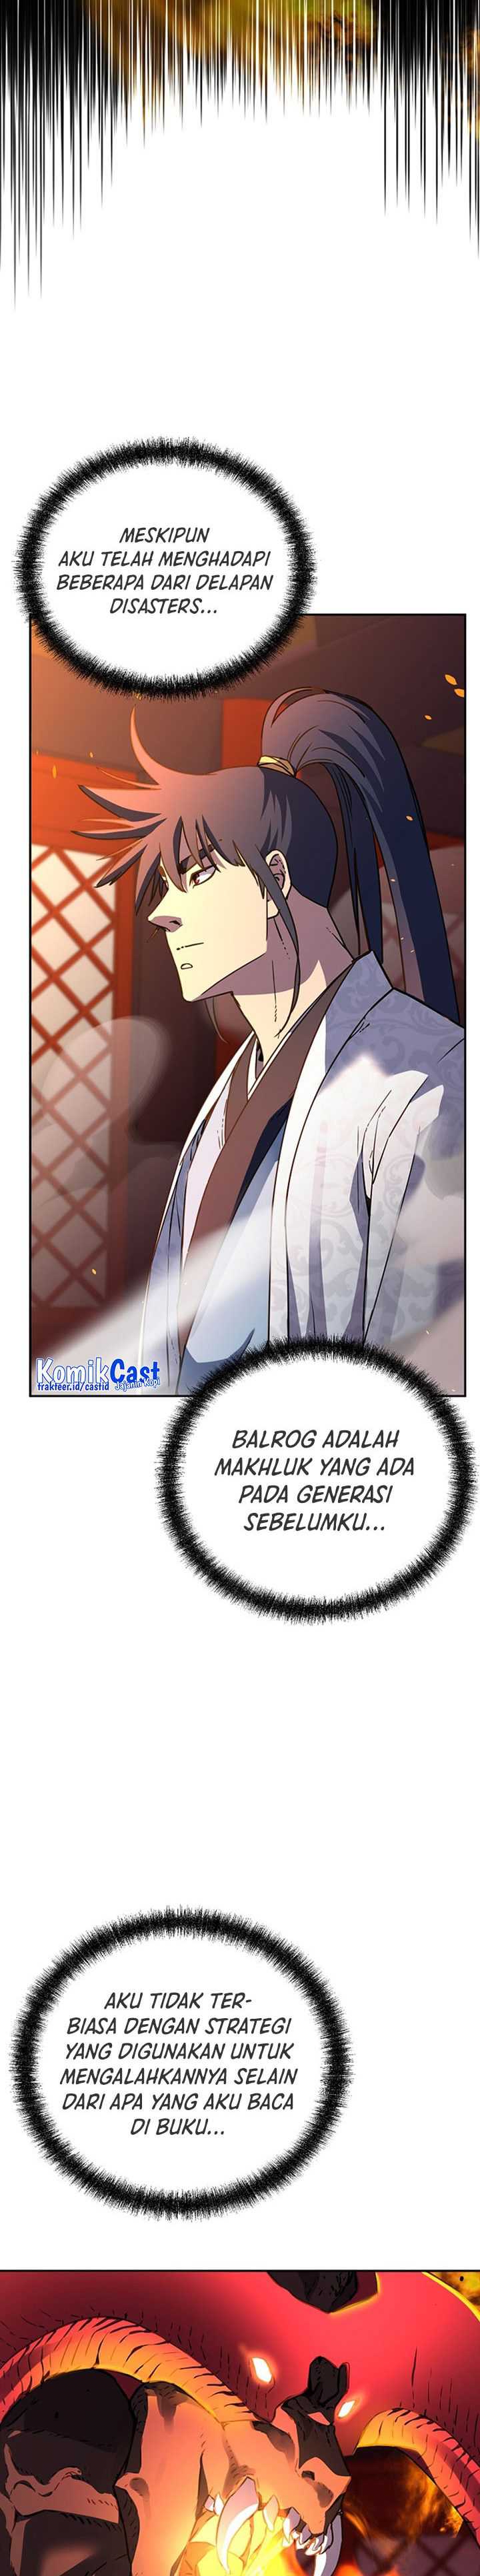 Reincarnation of the Murim Clan’s Former Ranker Chapter 79